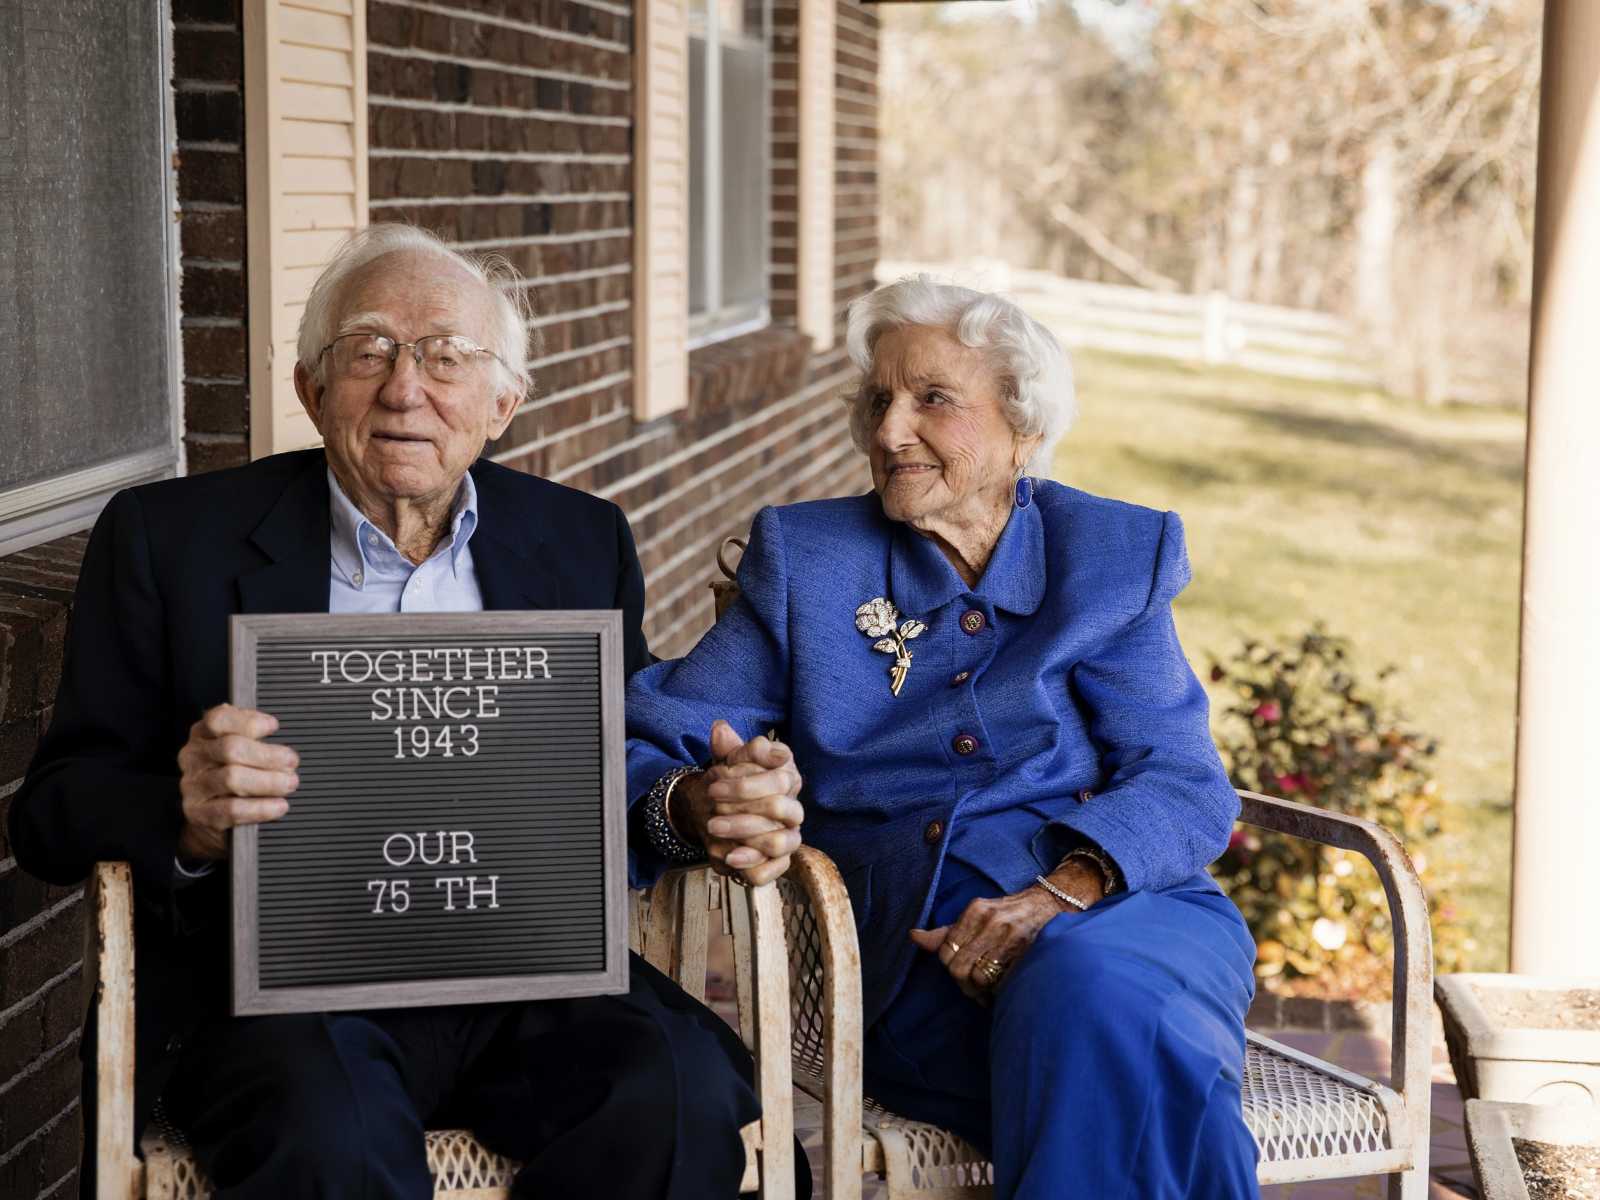 92 year old woman sits in chair holding hands with her husband who is holding sign that says, "together since 1943"